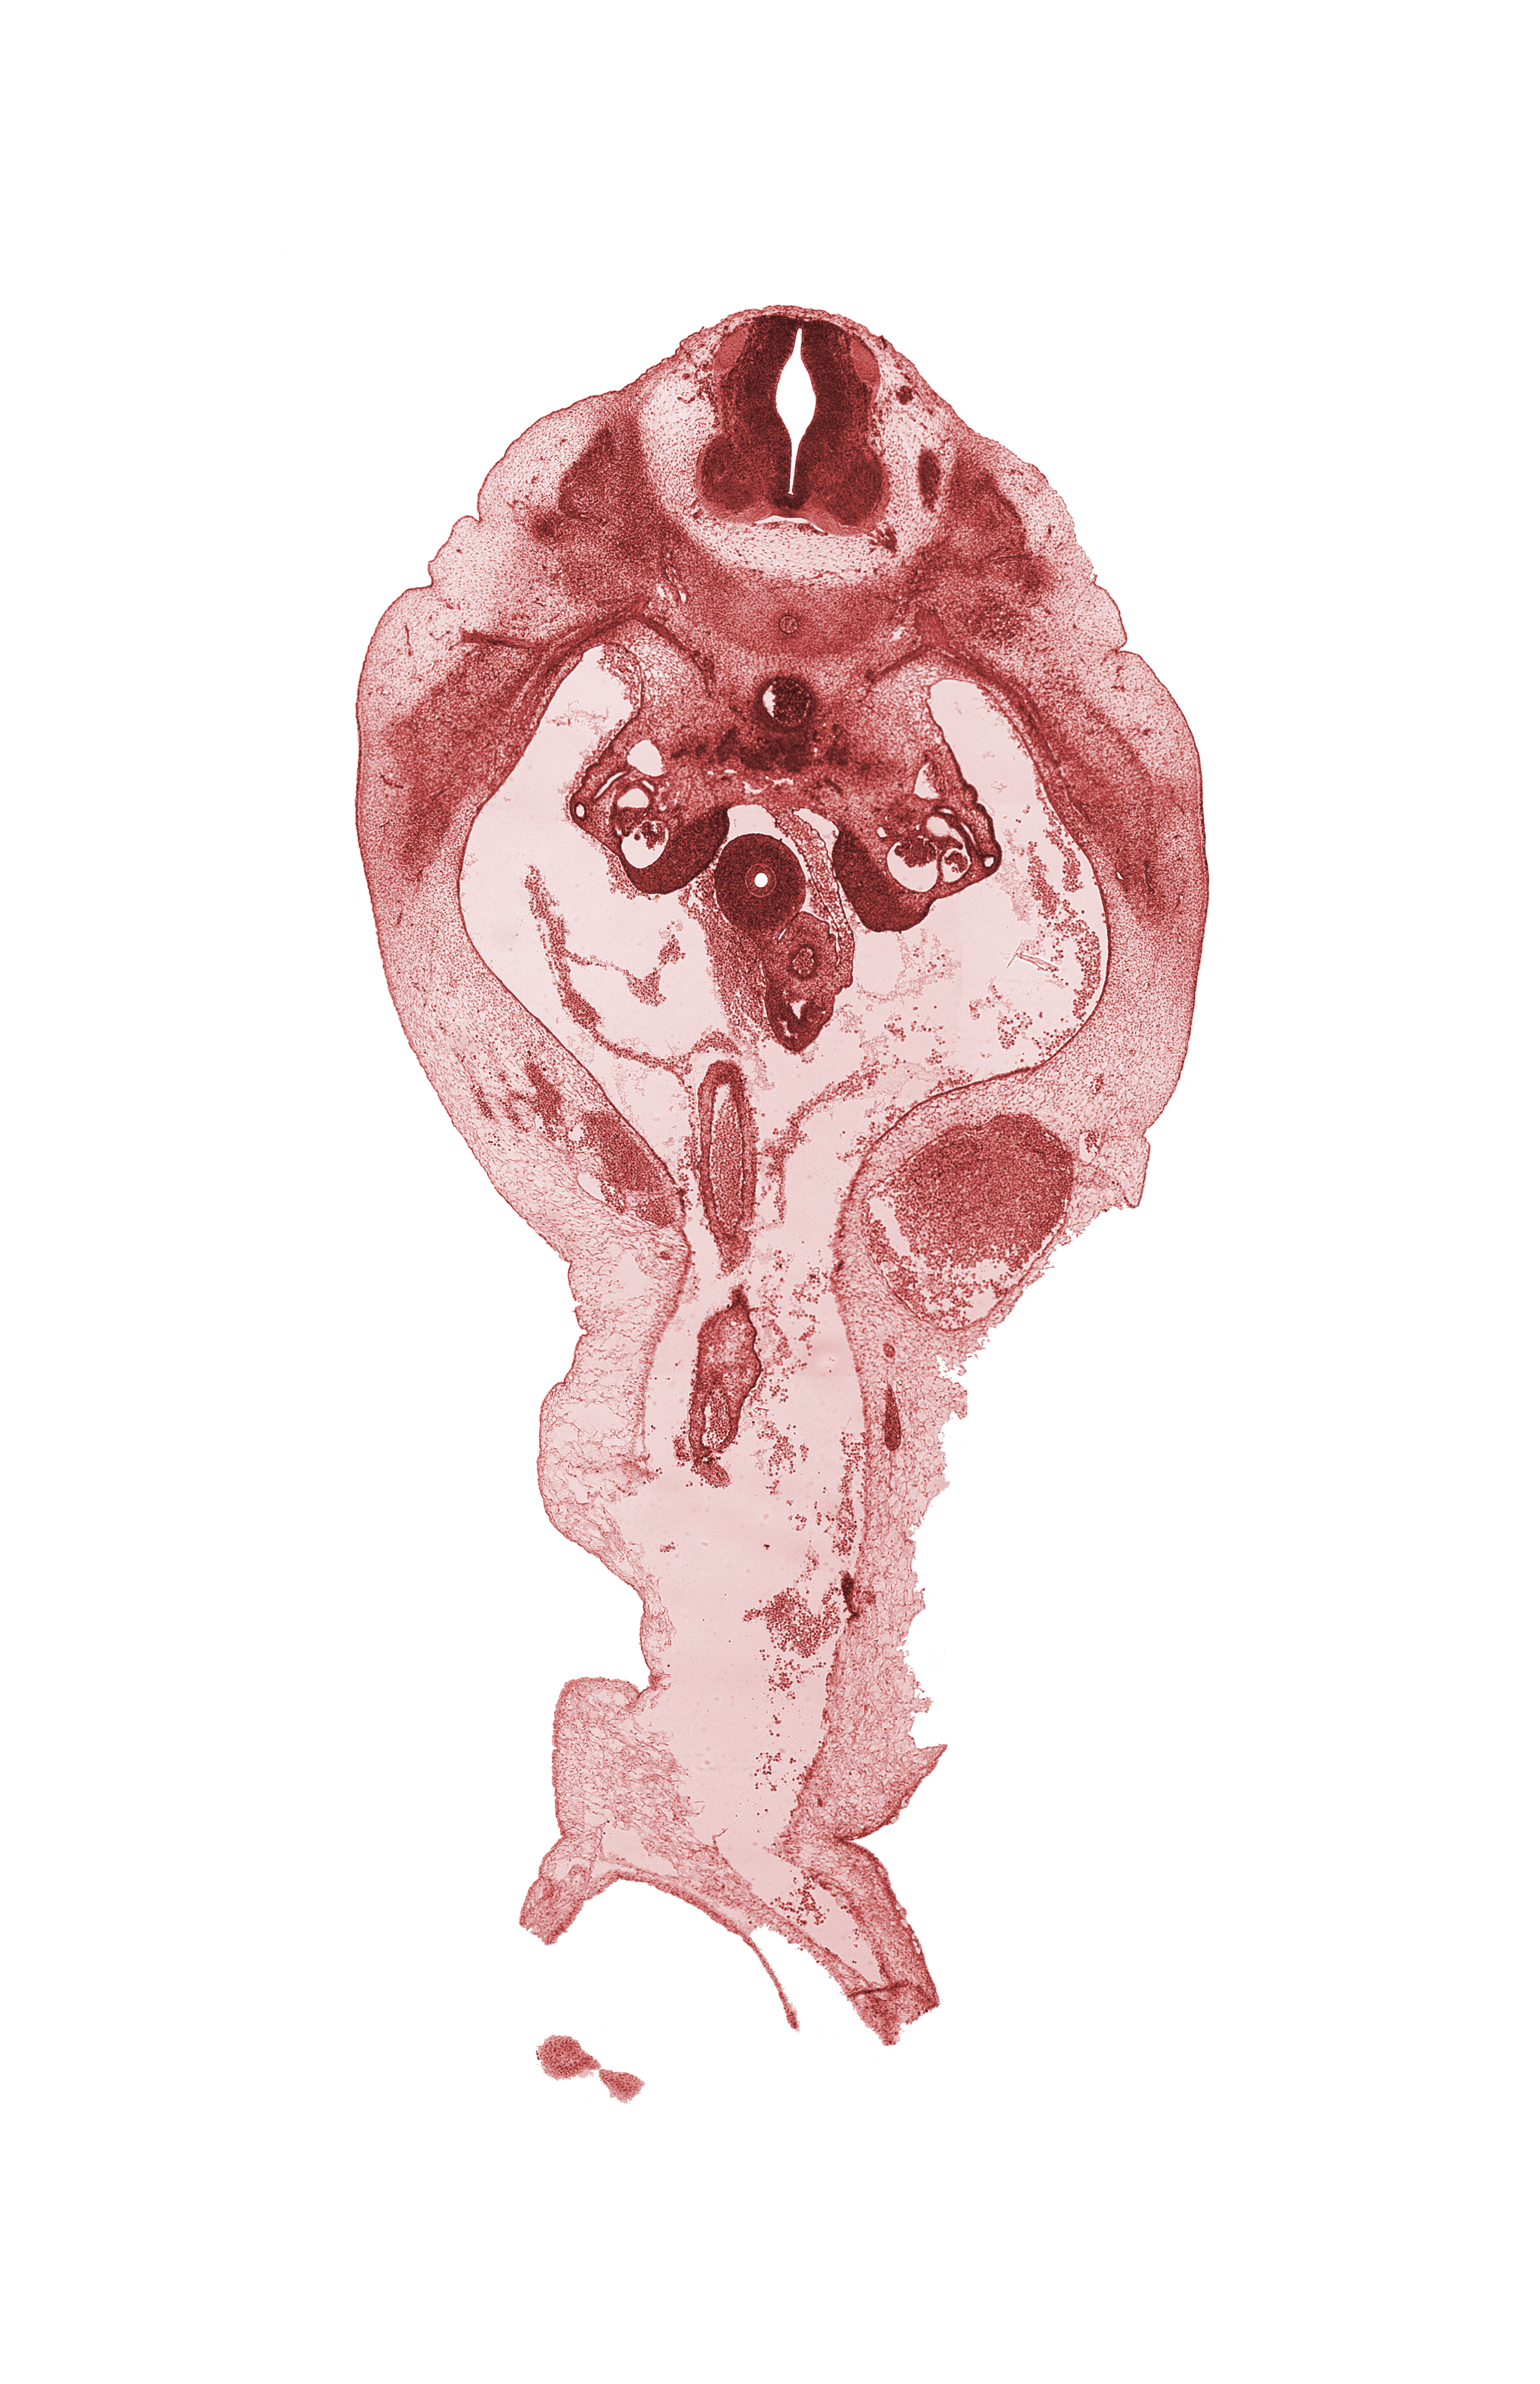 T-12 spinal ganglion, central canal of spinal cord, communicating ramus, duodenum, neural arch, peritoneal cavity, subcostal nerve (T-12), superior mesenteric artery, superior mesenteric vein, umbilical coelom, umbilical vein